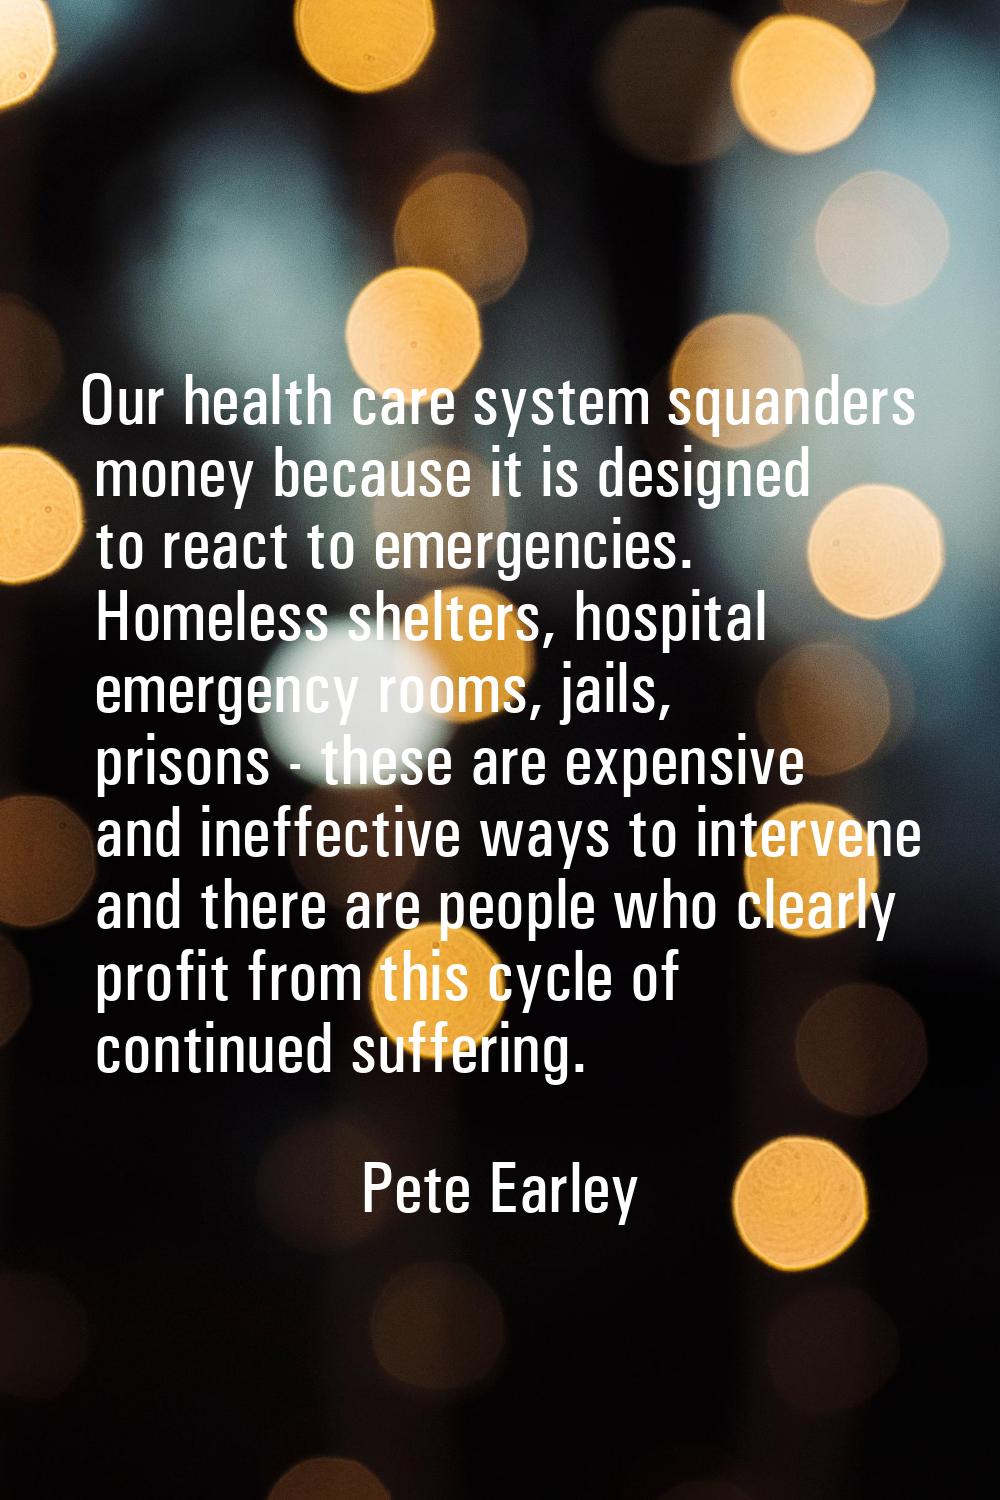 Our health care system squanders money because it is designed to react to emergencies. Homeless she